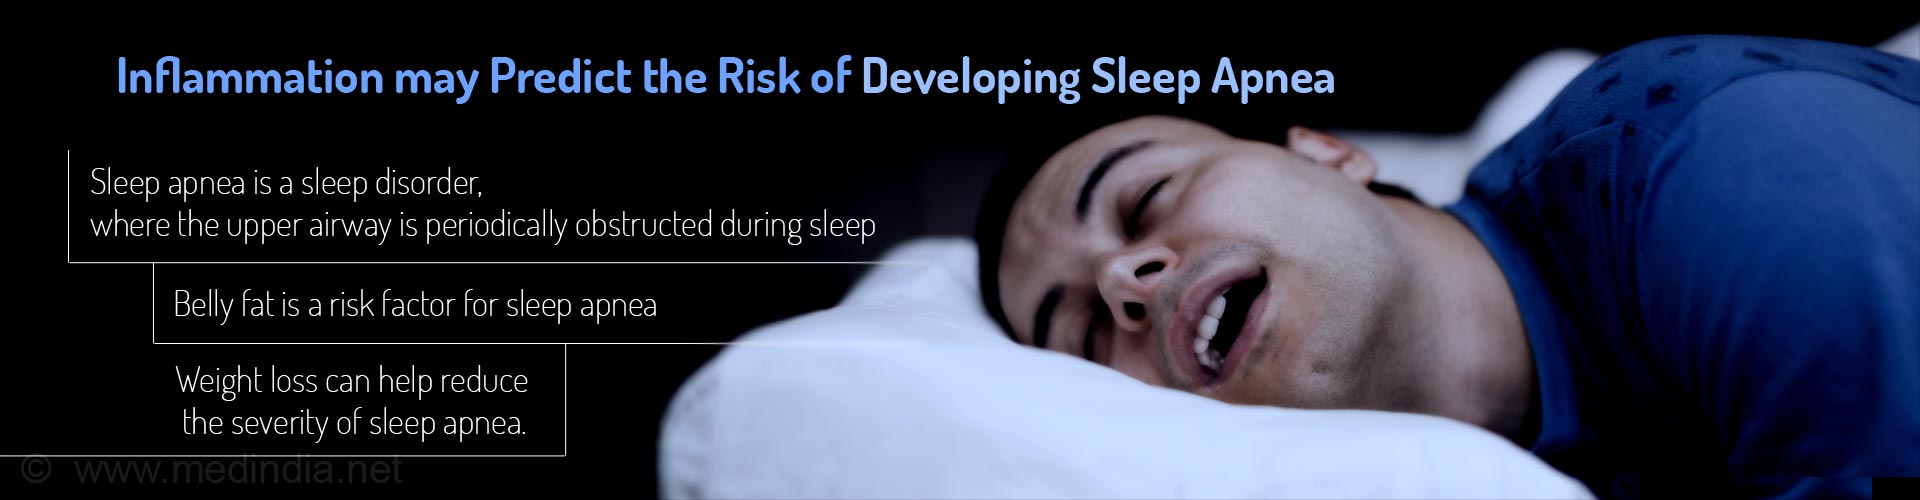 Inflammation may predict the risk of developing sleep apnea
- Sleep apnea is a sleep disorder, where the upper airway is periodically obstructed during sleep
- Belly fat is a risk factor for sleep apnea
- Weight loss can help reduce the severity of sleep apnea